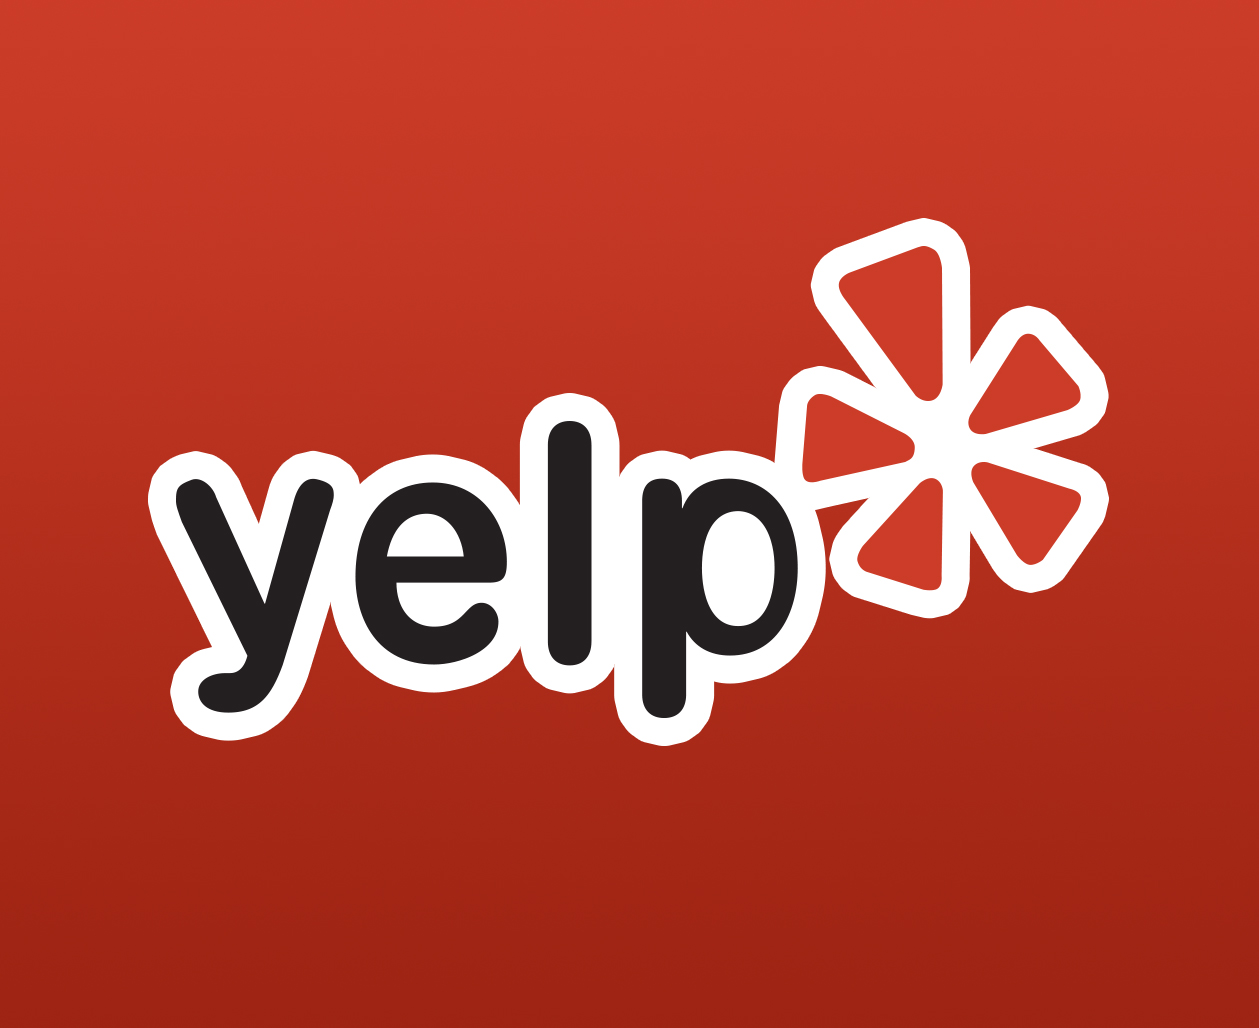 Find Us on Yelp